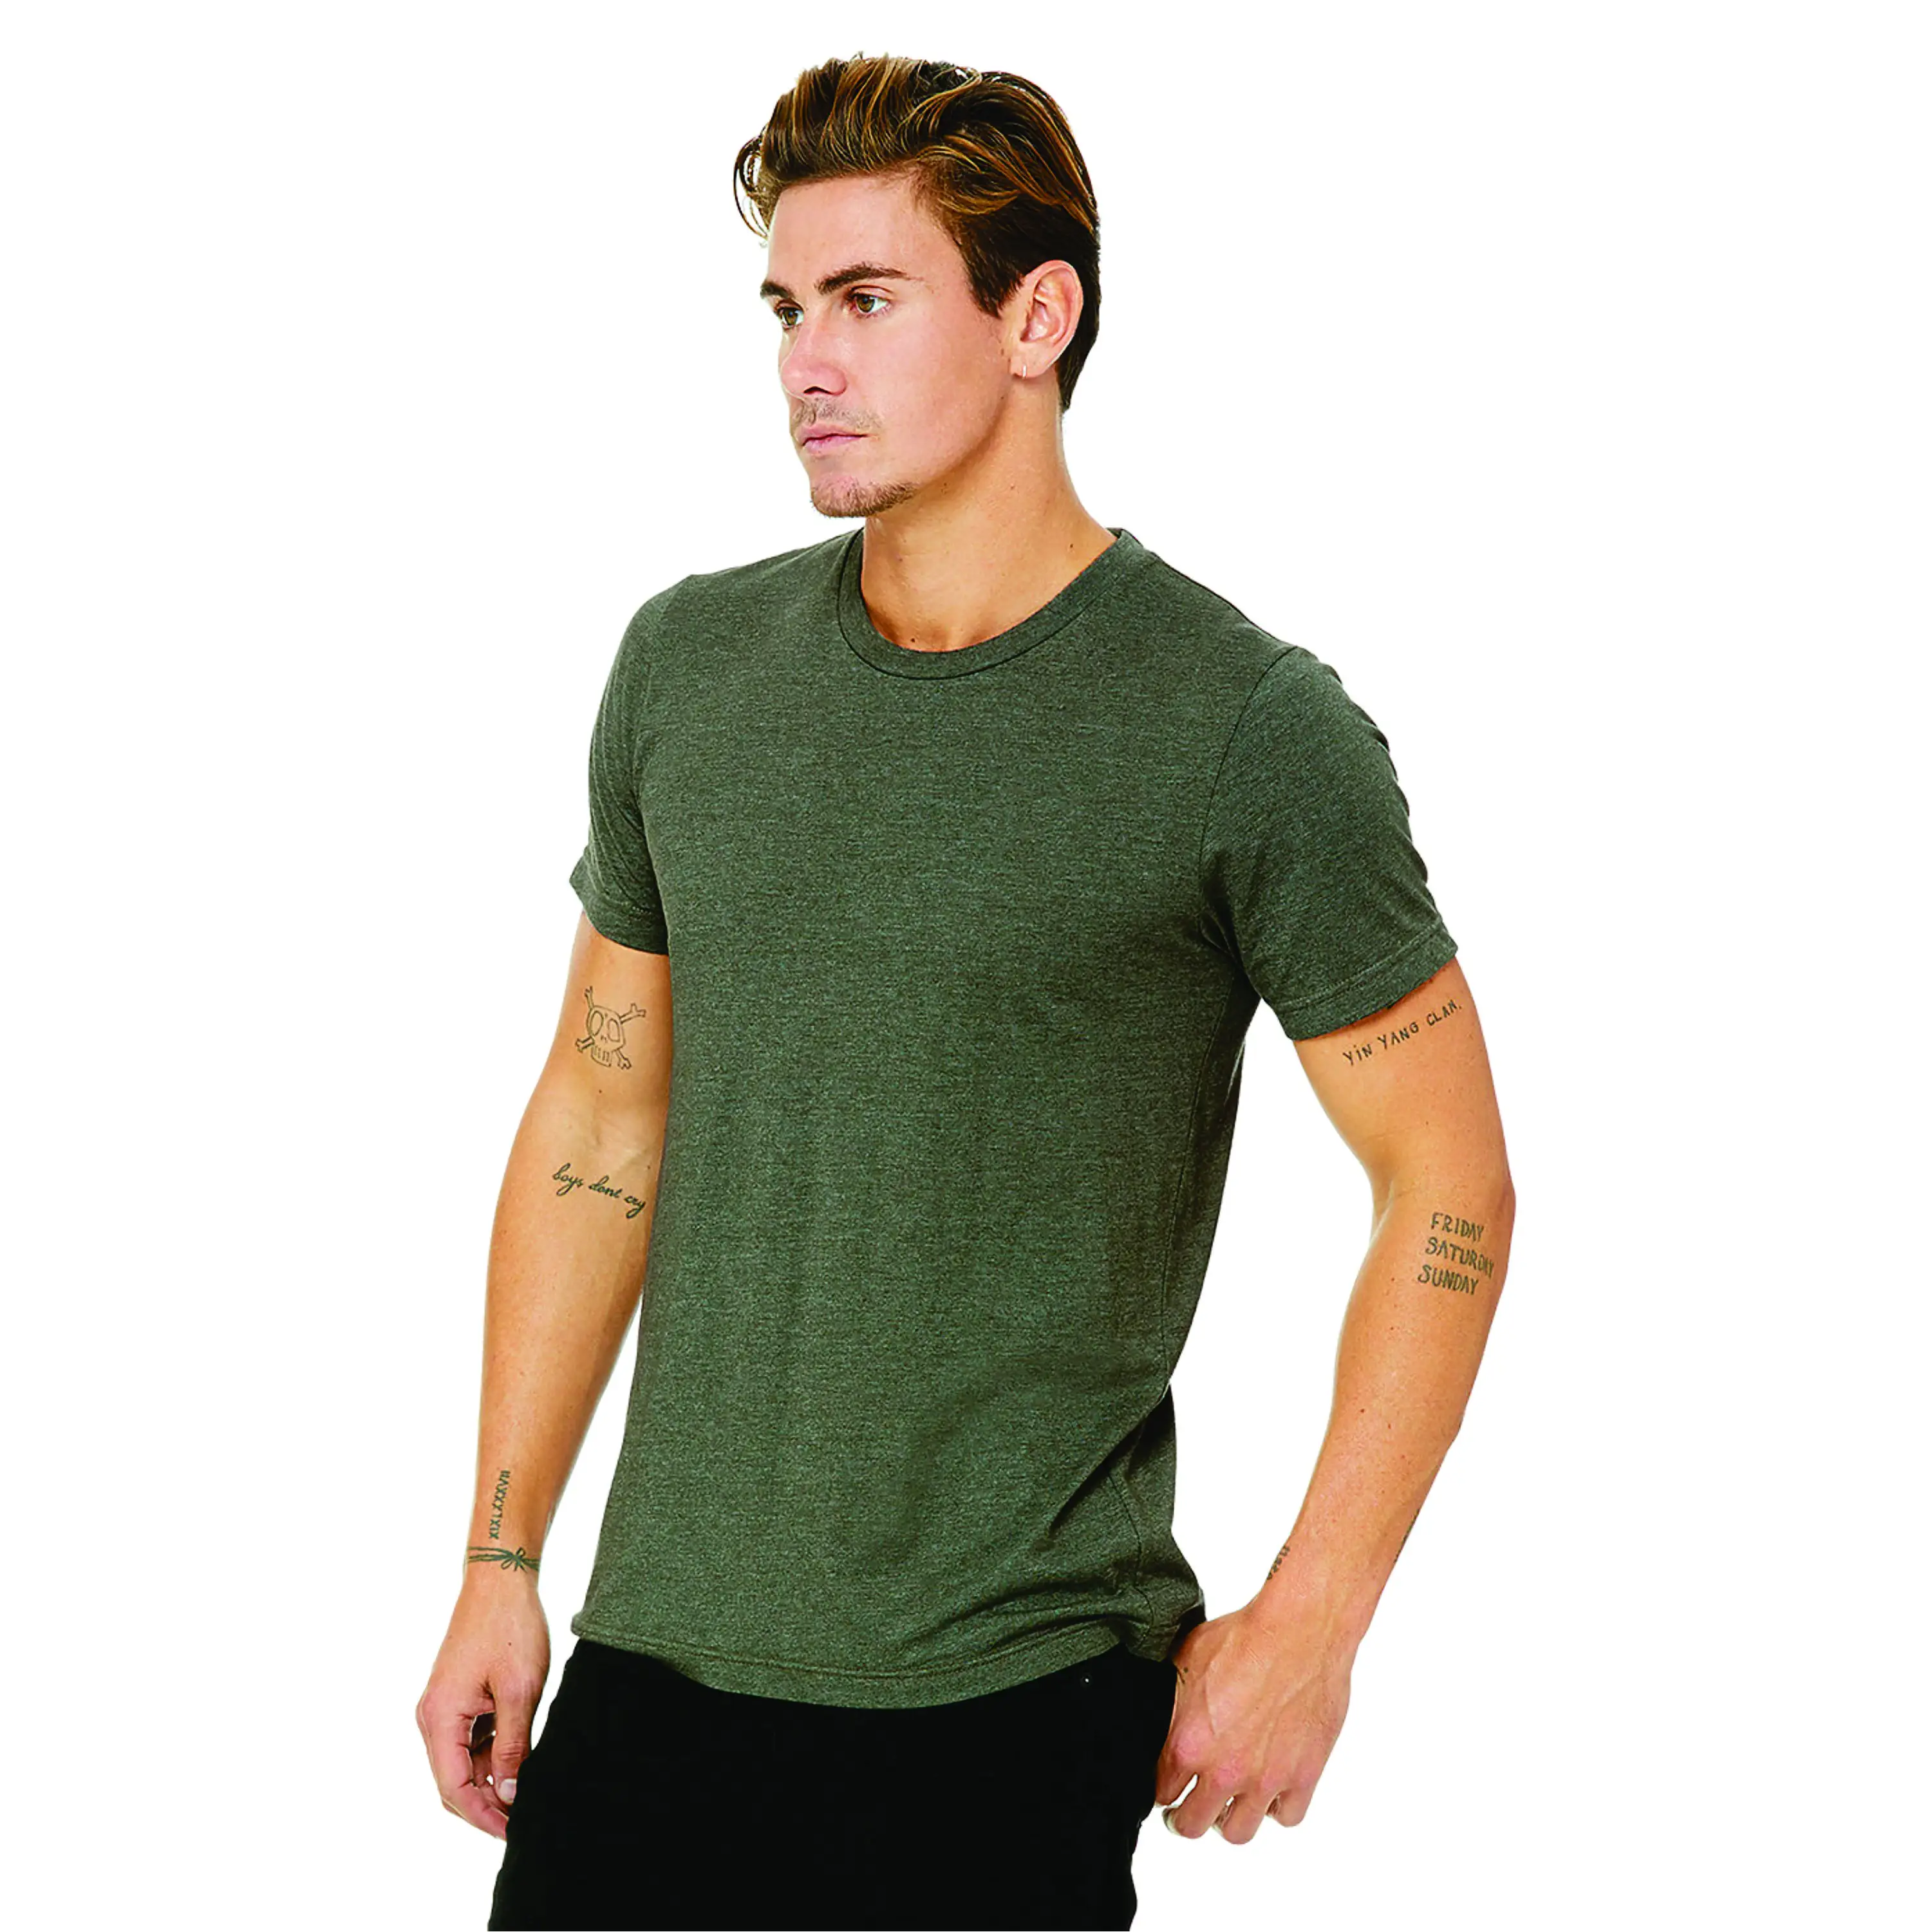 Heather Military Green Unisex CVC Short Sleeve T-Shirt: 52% Airlume Combed Cotton, 48% Poly, Lightweight Comfort